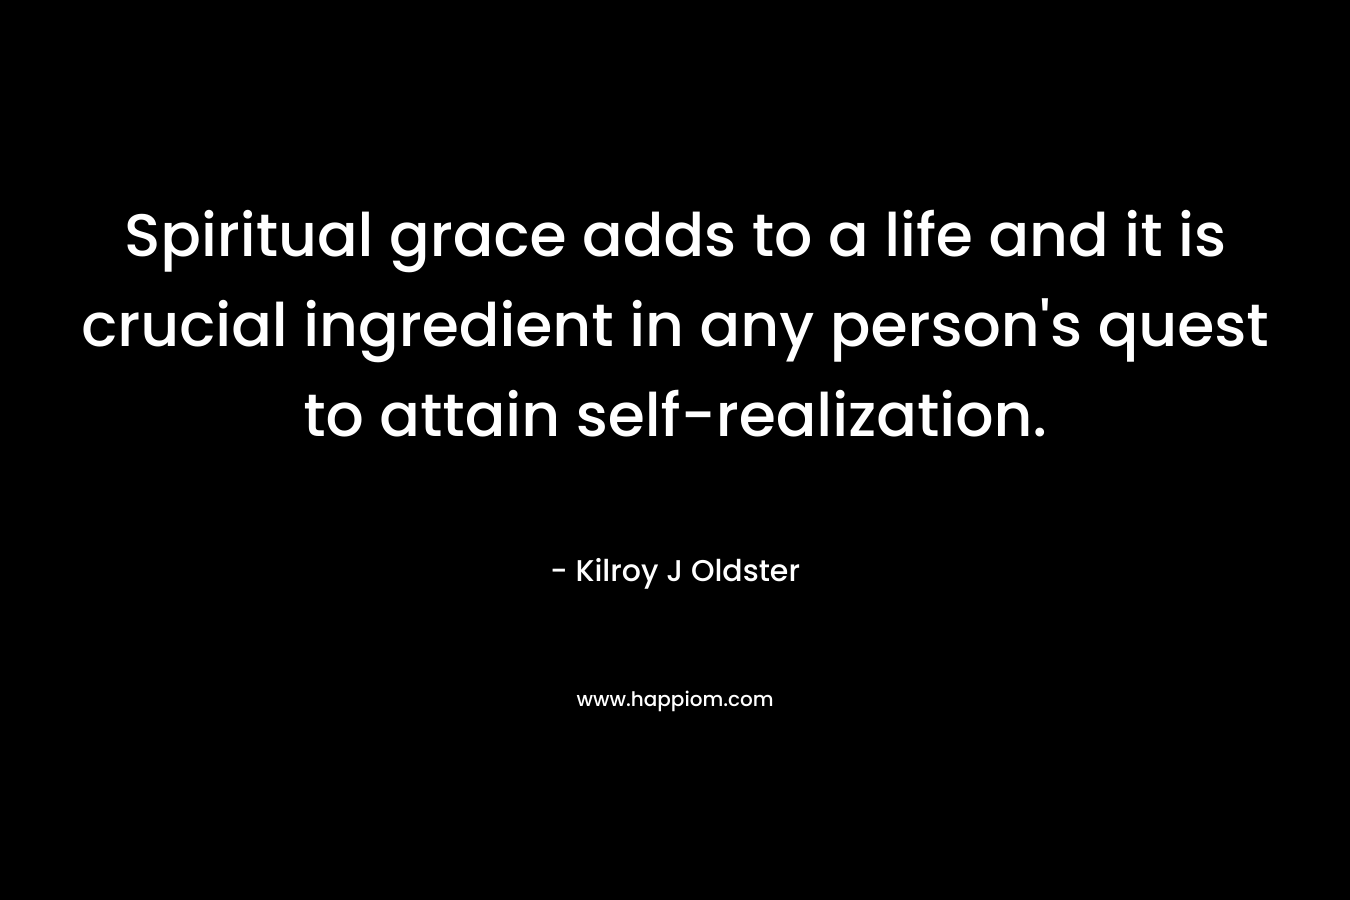 Spiritual grace adds to a life and it is crucial ingredient in any person’s quest to attain self-realization. – Kilroy J Oldster